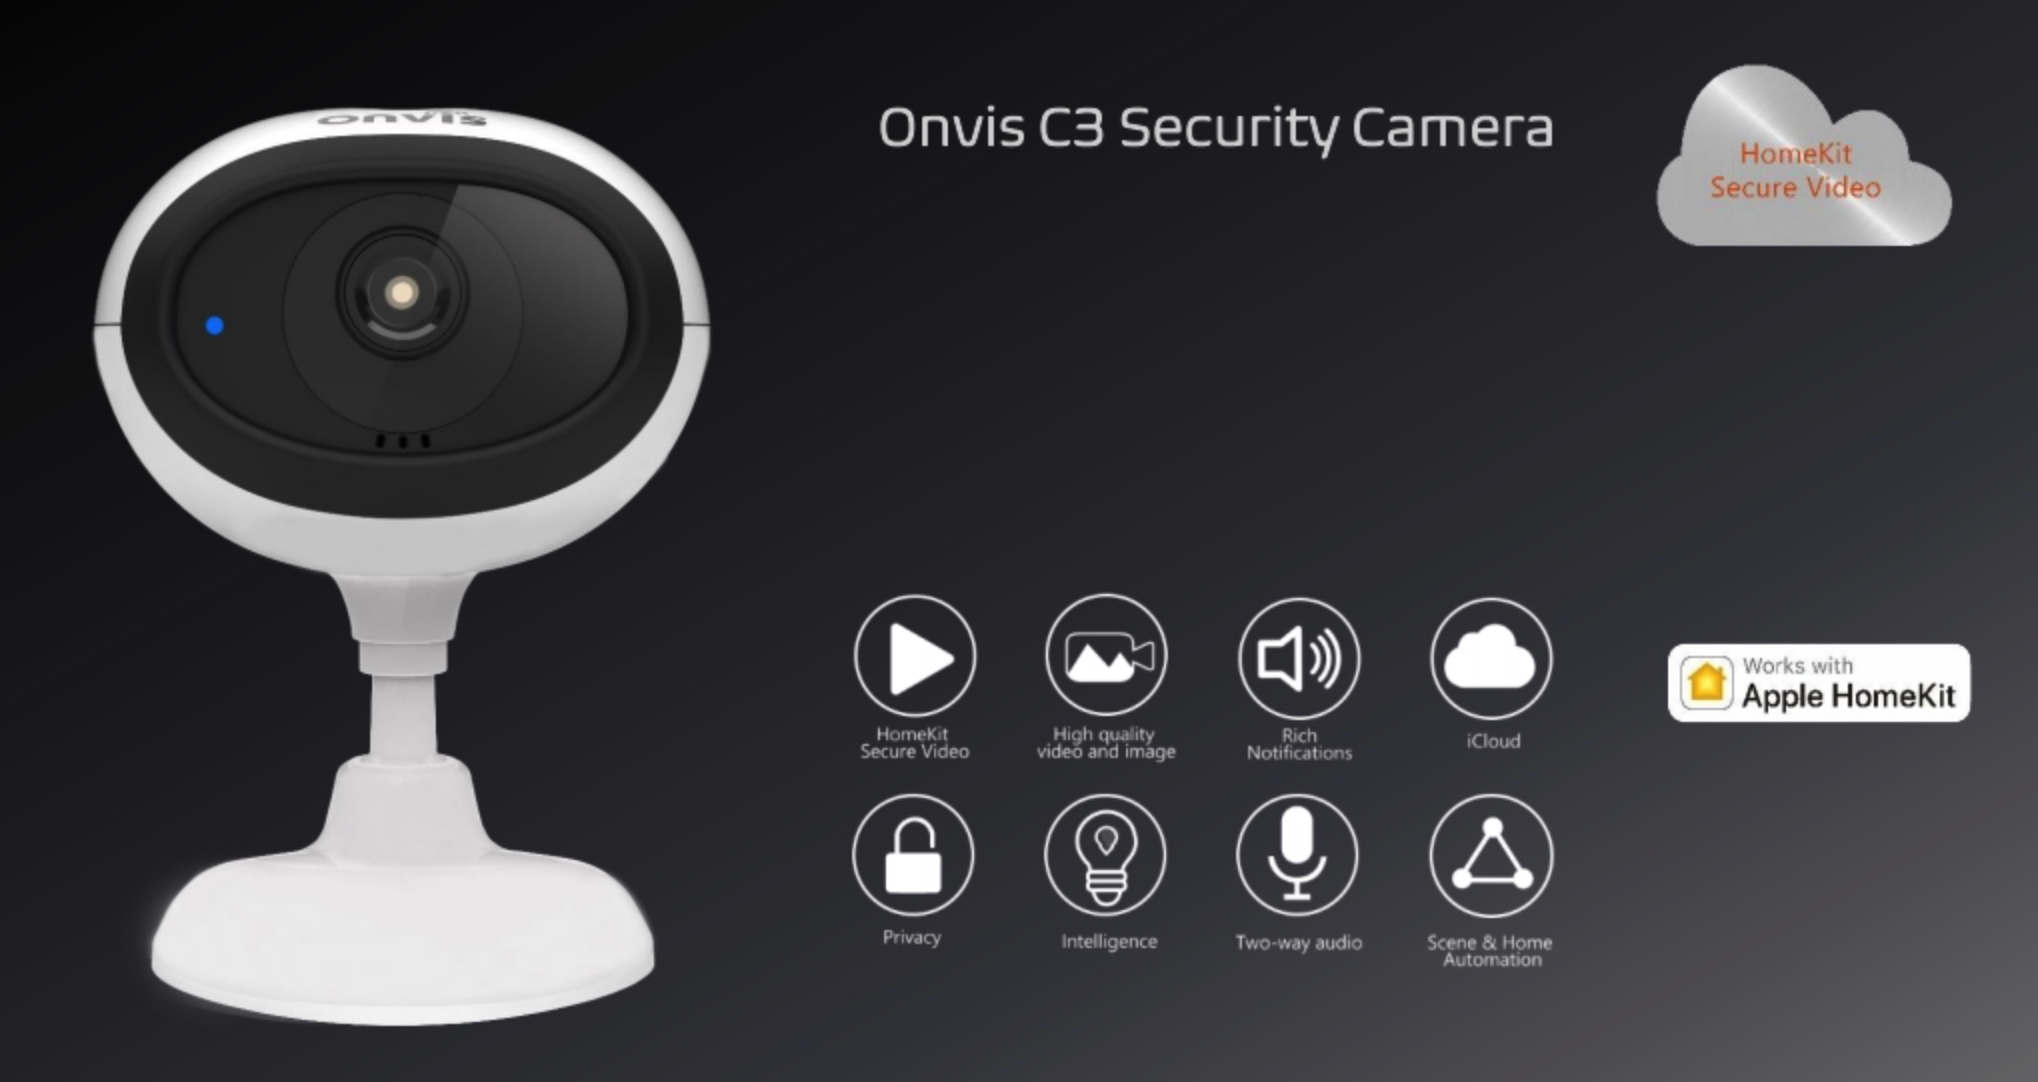 https://www.imore.com/sites/imore.com/files/styles/large/public/field/image/2020/05/onvis-c3-security-camera-features.jpg?itok=TN2R2Rty